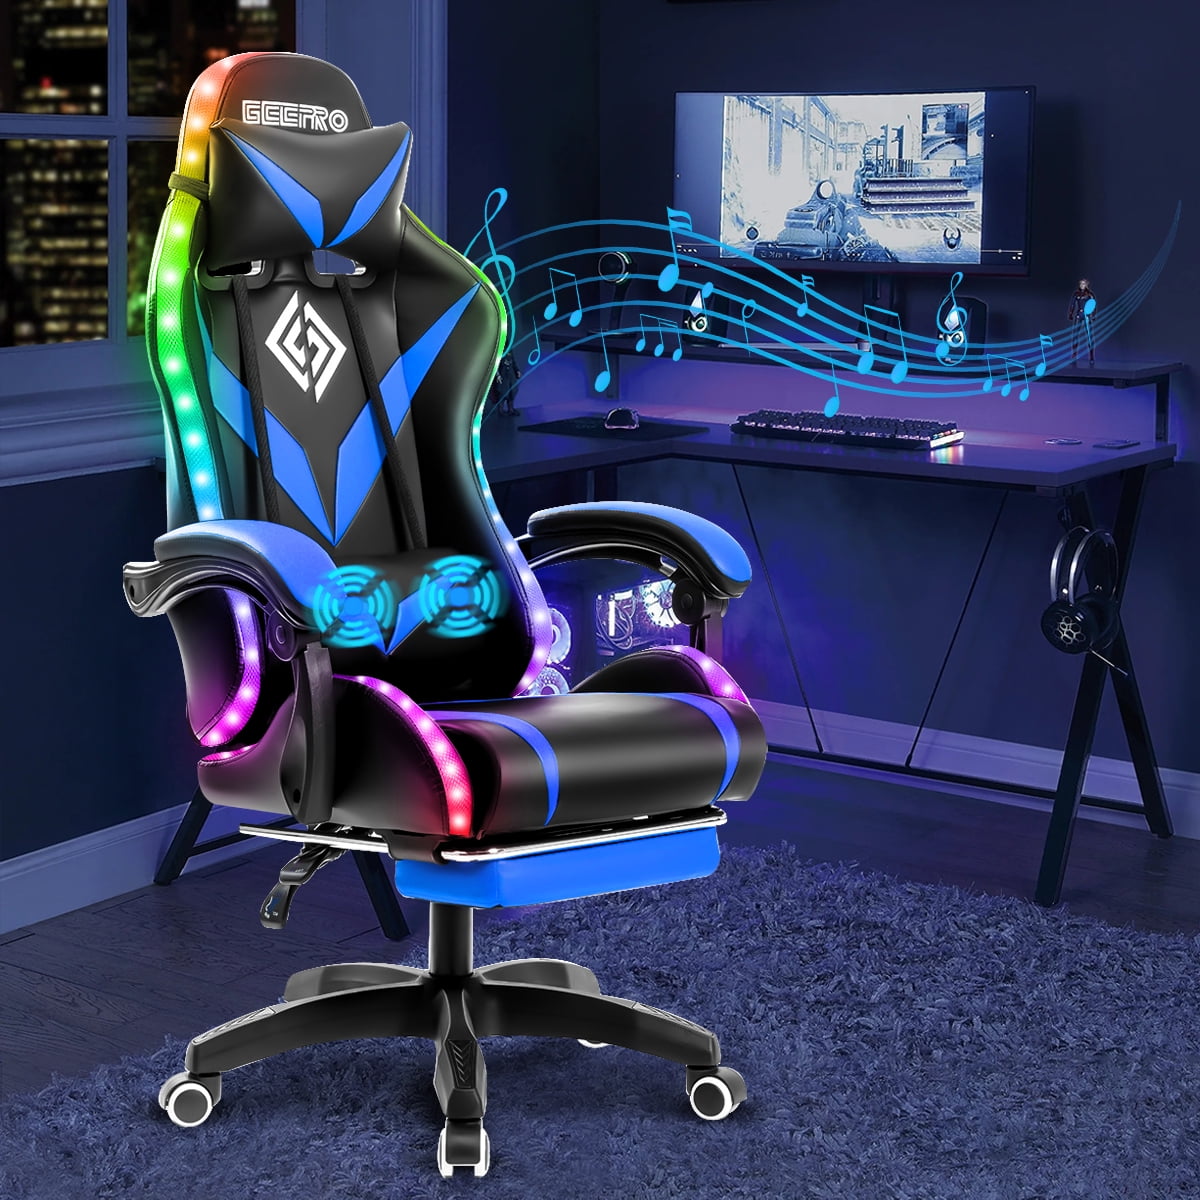 E-Gaming Racing Style Gaming Chair - Blue - LED Lights - Foot Rest